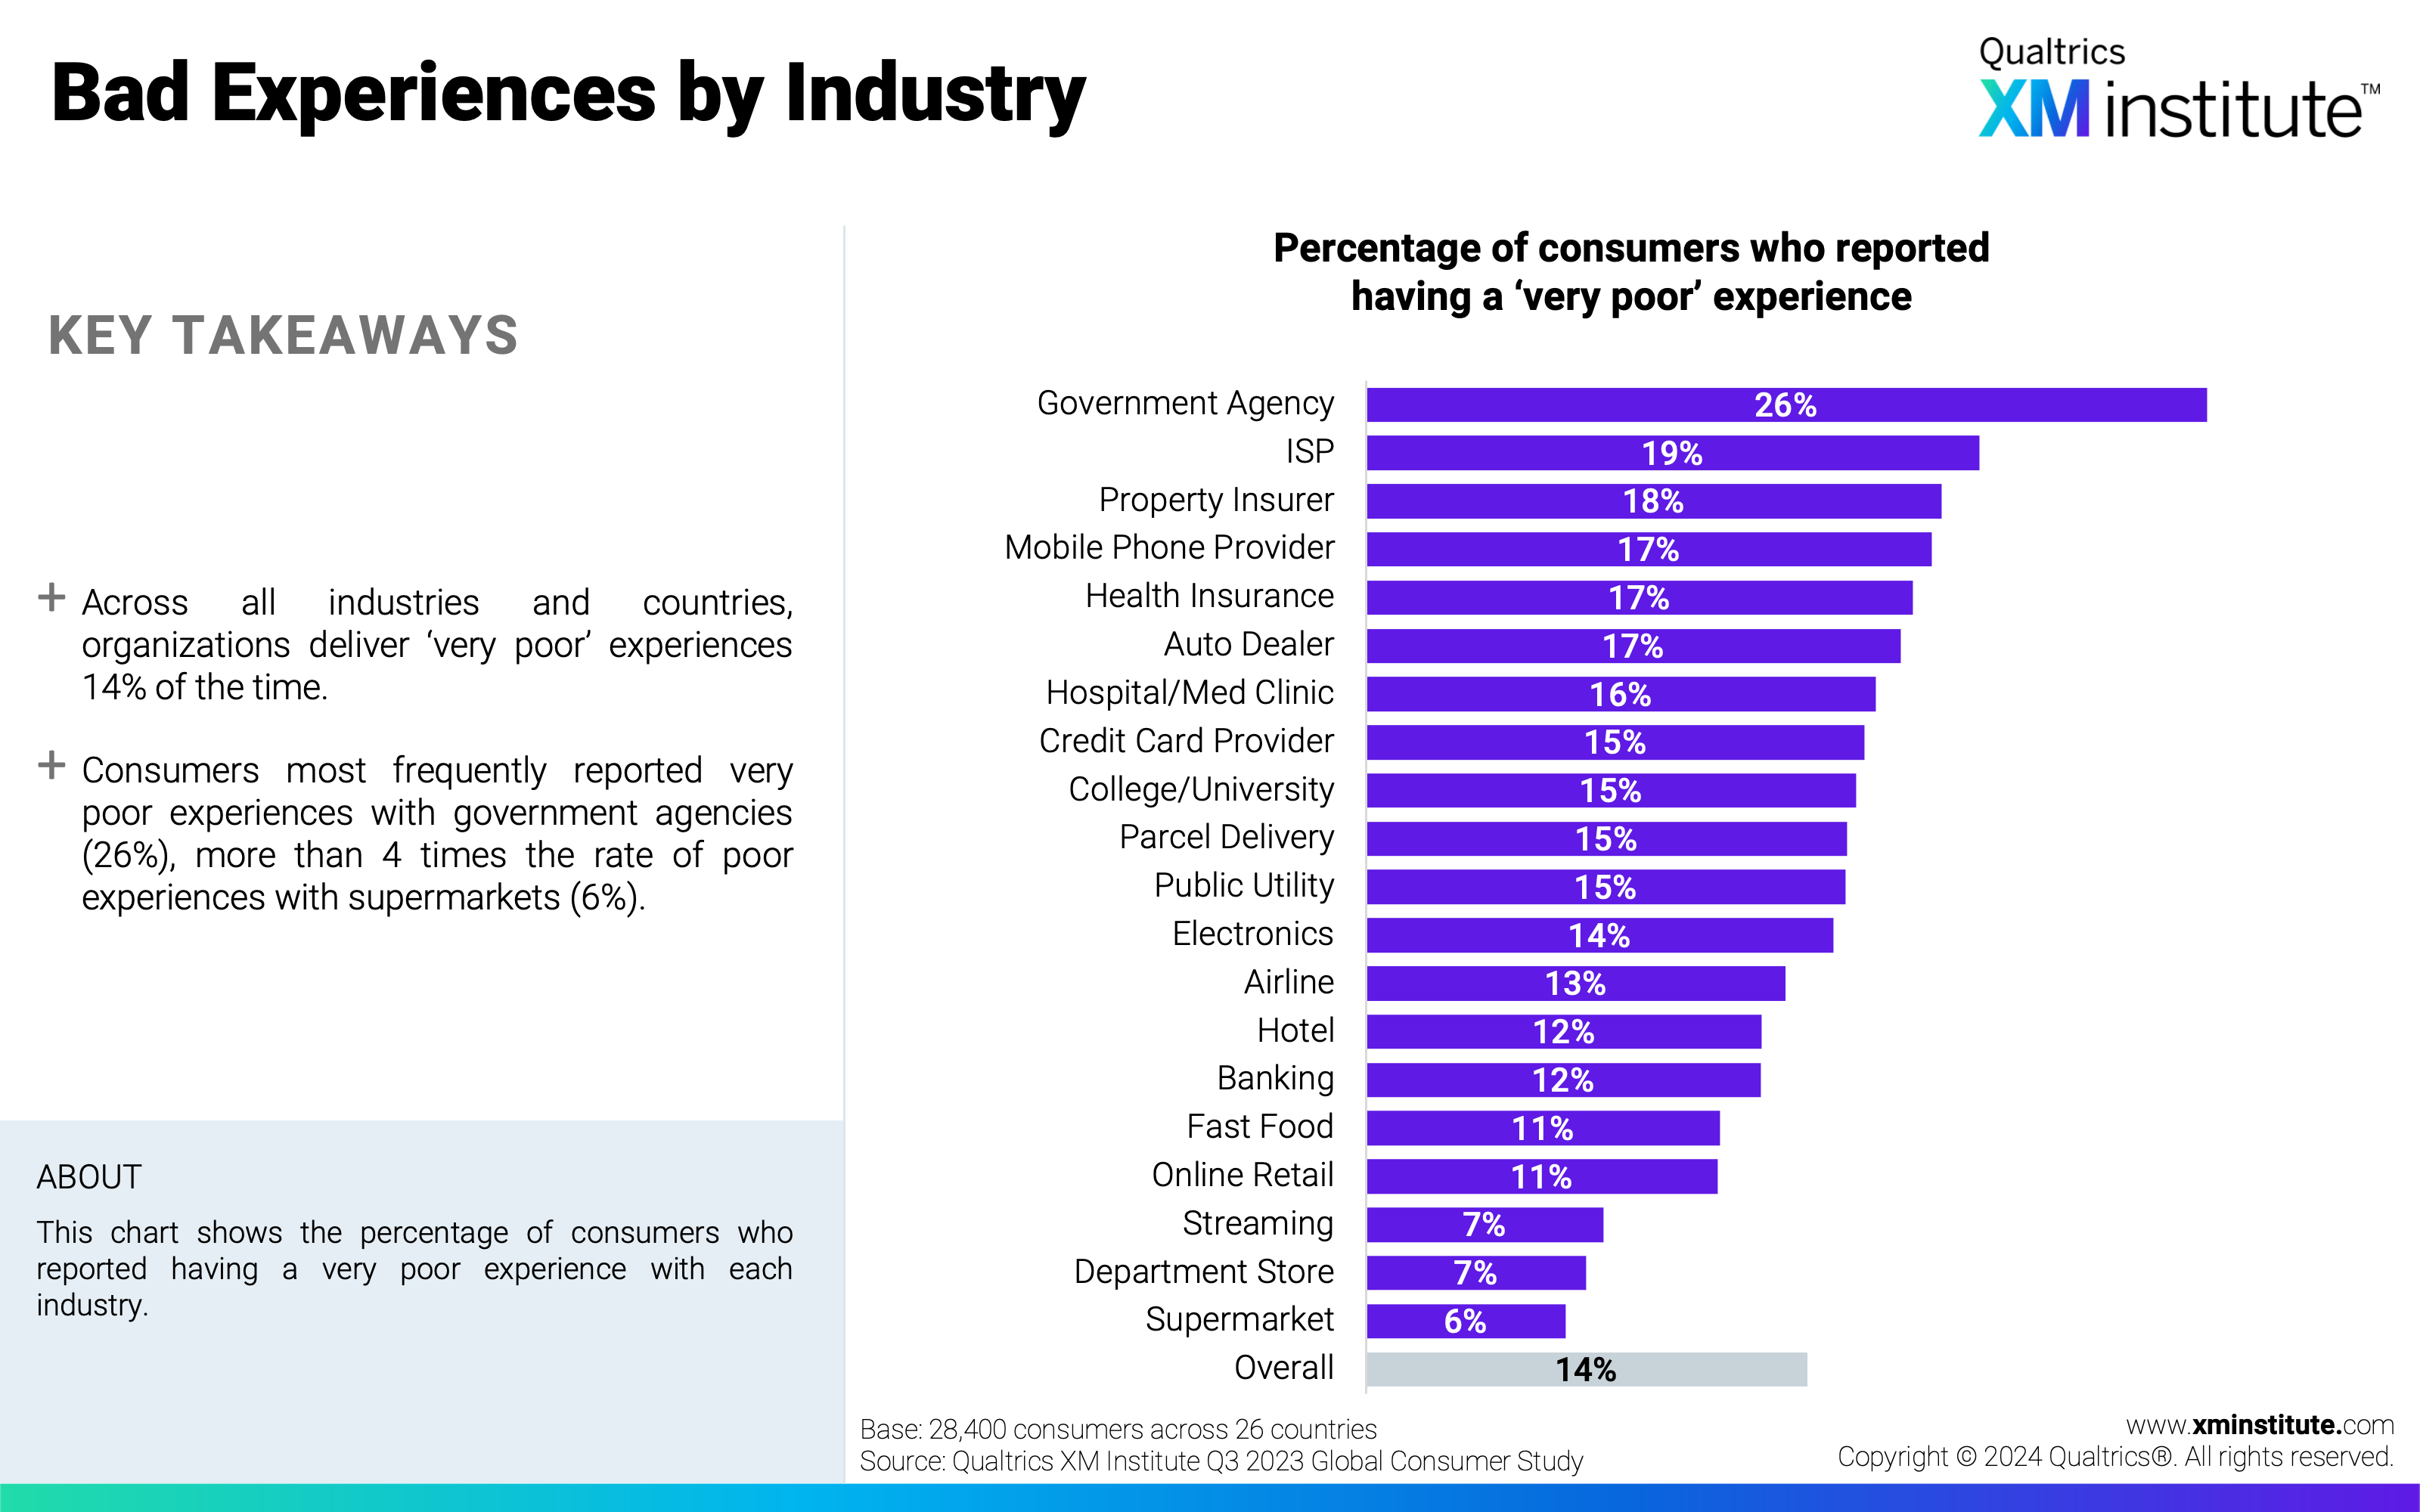 This chart shows the percentage of consumers who reported having a very poor experience with each industry. 